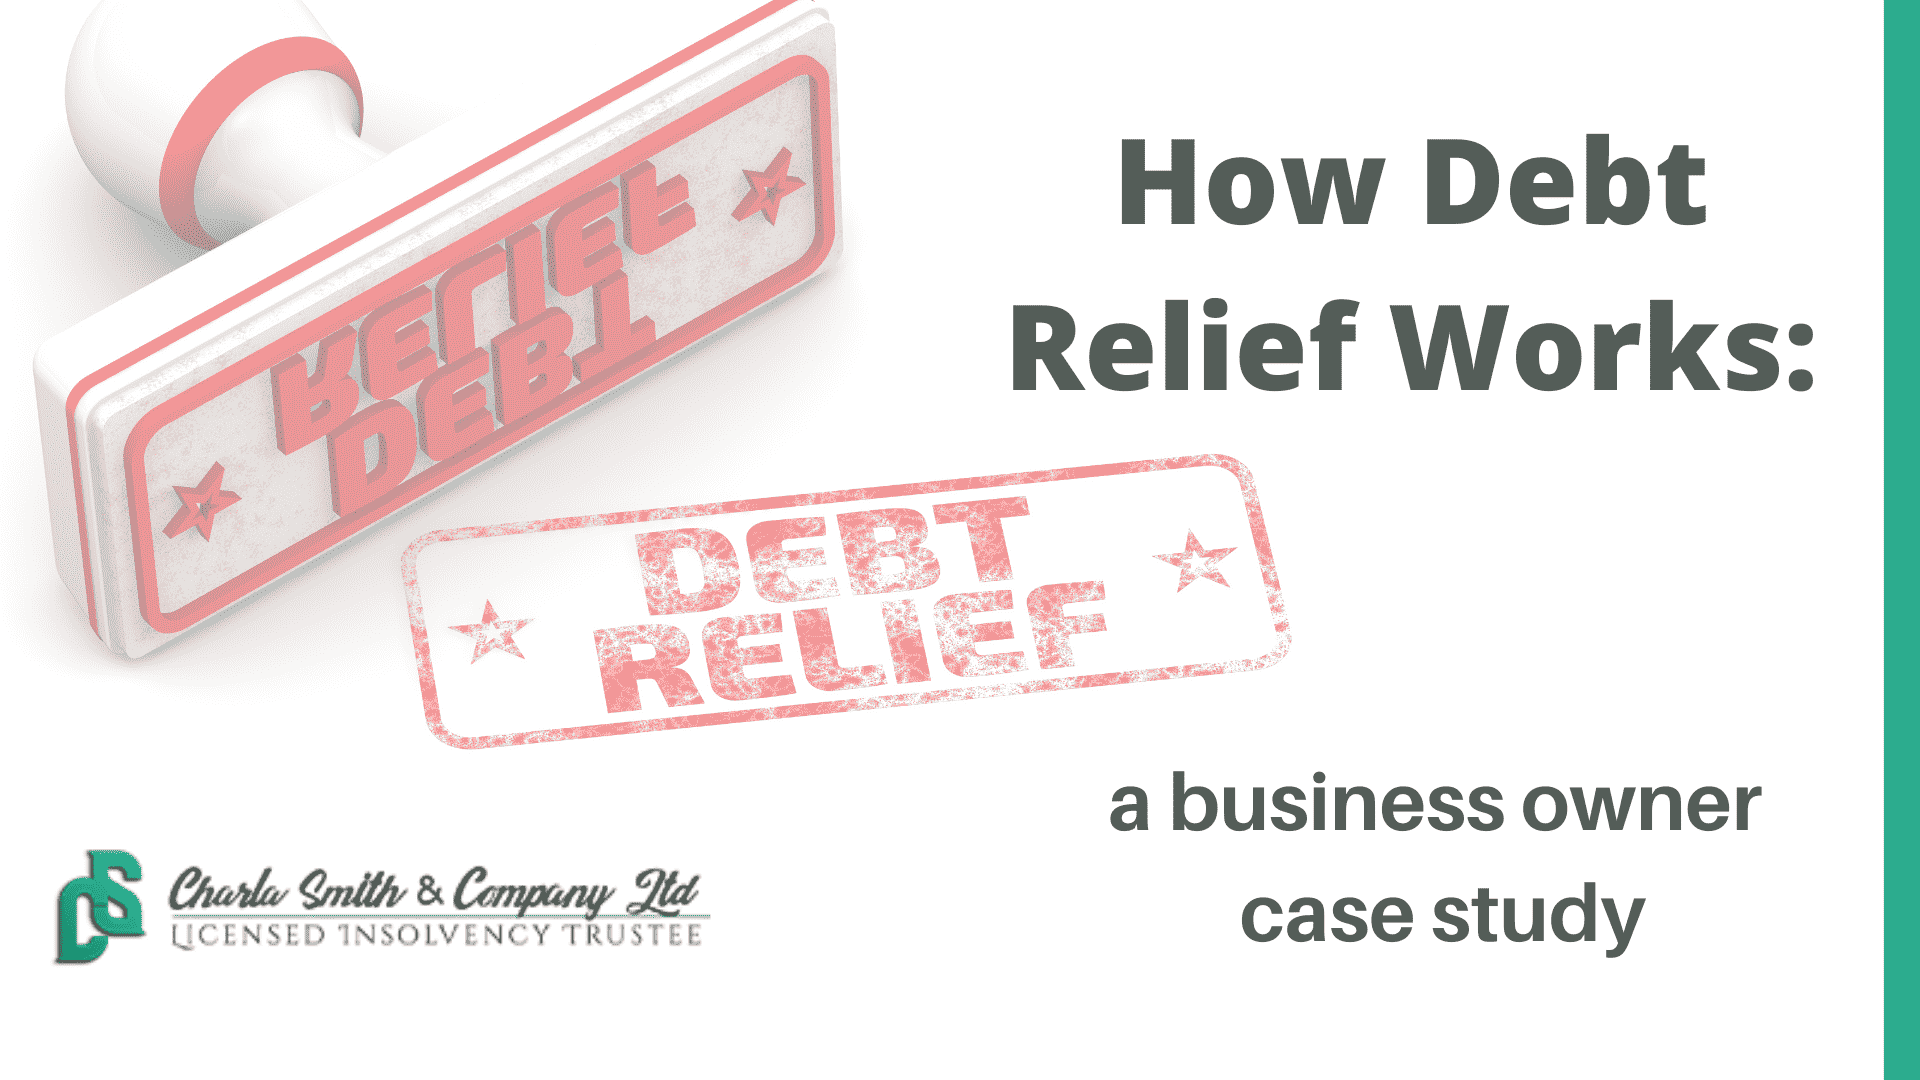 How debt relief works: A business owner case study